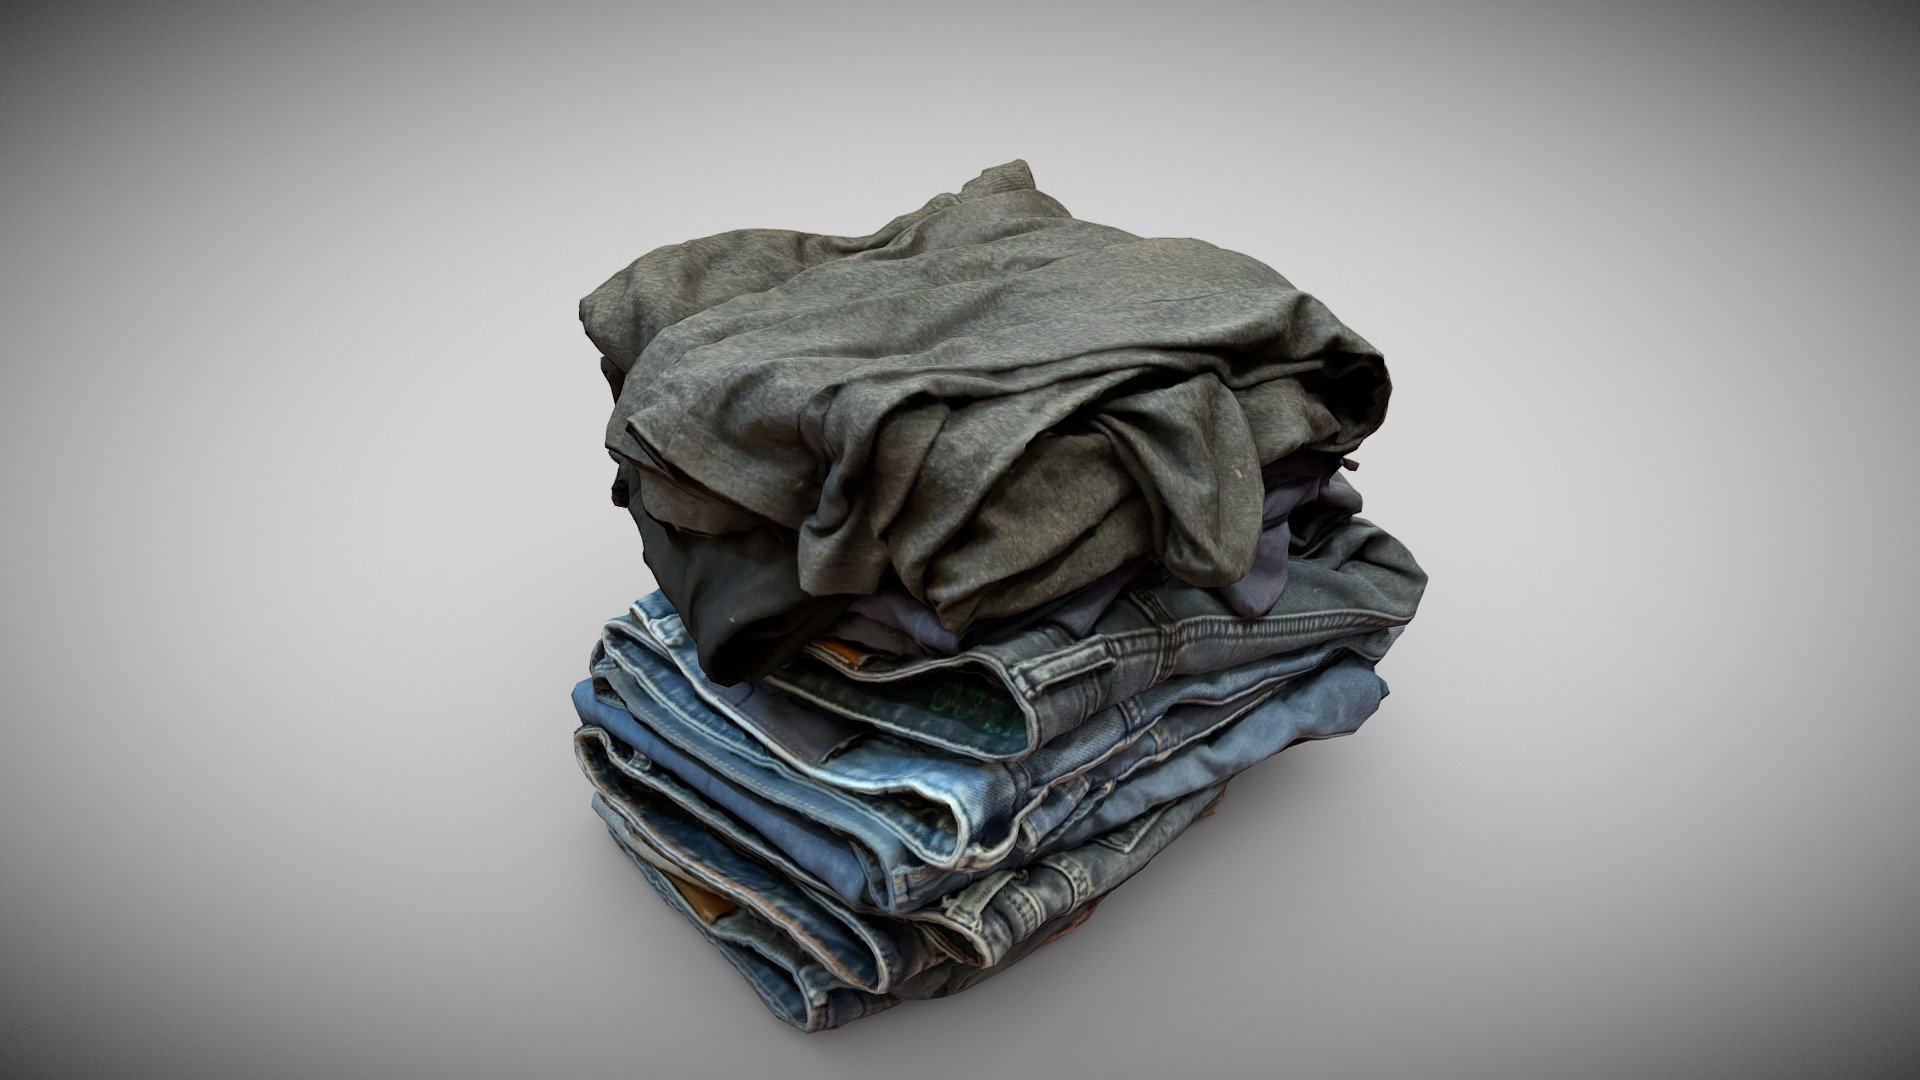 A small pile of clothes on the floor, low poly and game ready.

Fully UV Mapped. Complete with Colour , Ambient Occlusion and Normal Map textures. Includes both OBJ and FBX formats 3d model